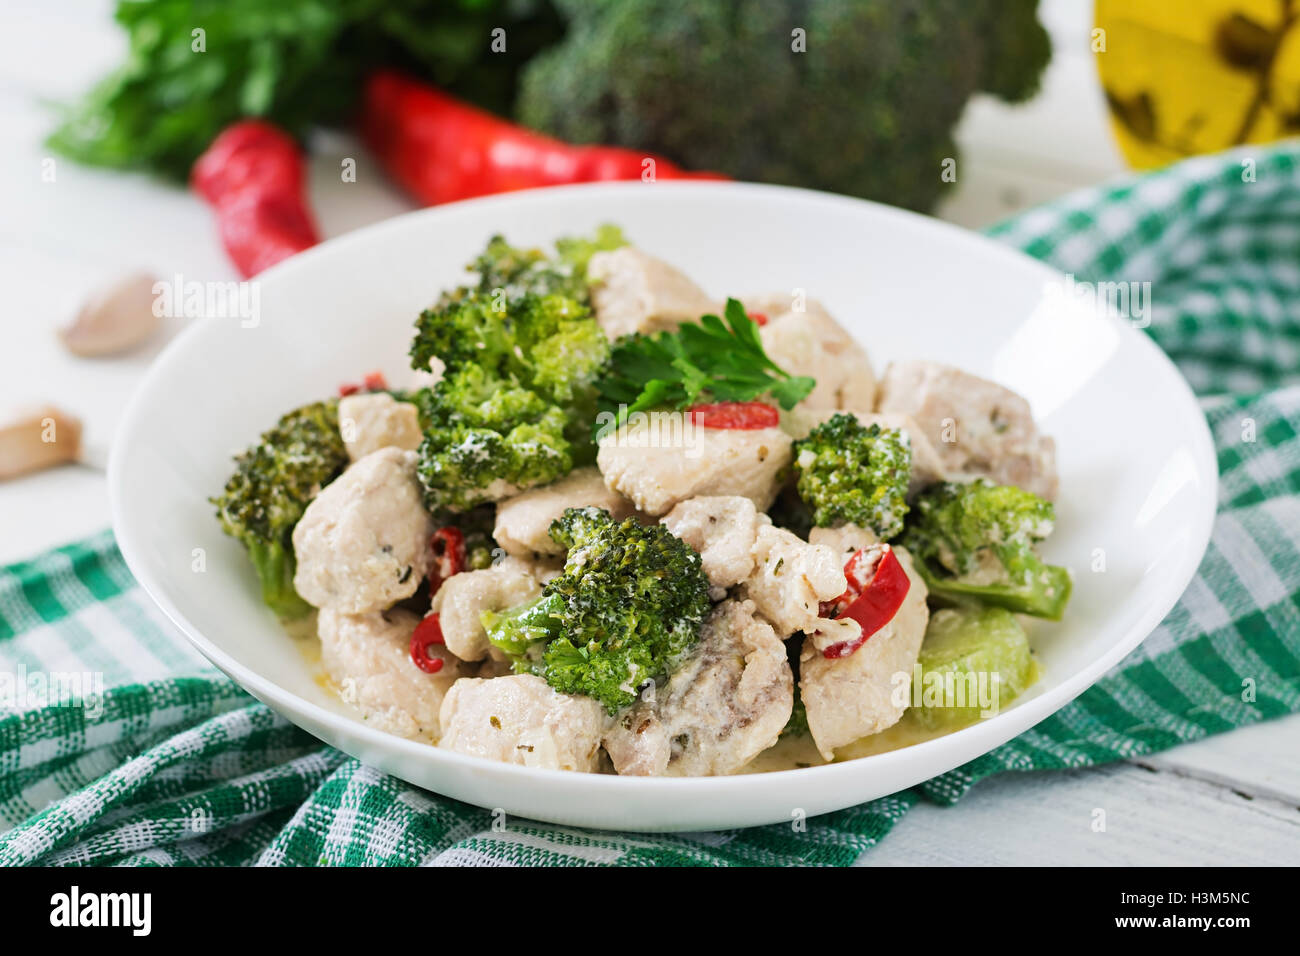 Delicate saute chicken with broccoli and chili peppers in a creamy garlic sauce Stock Photo